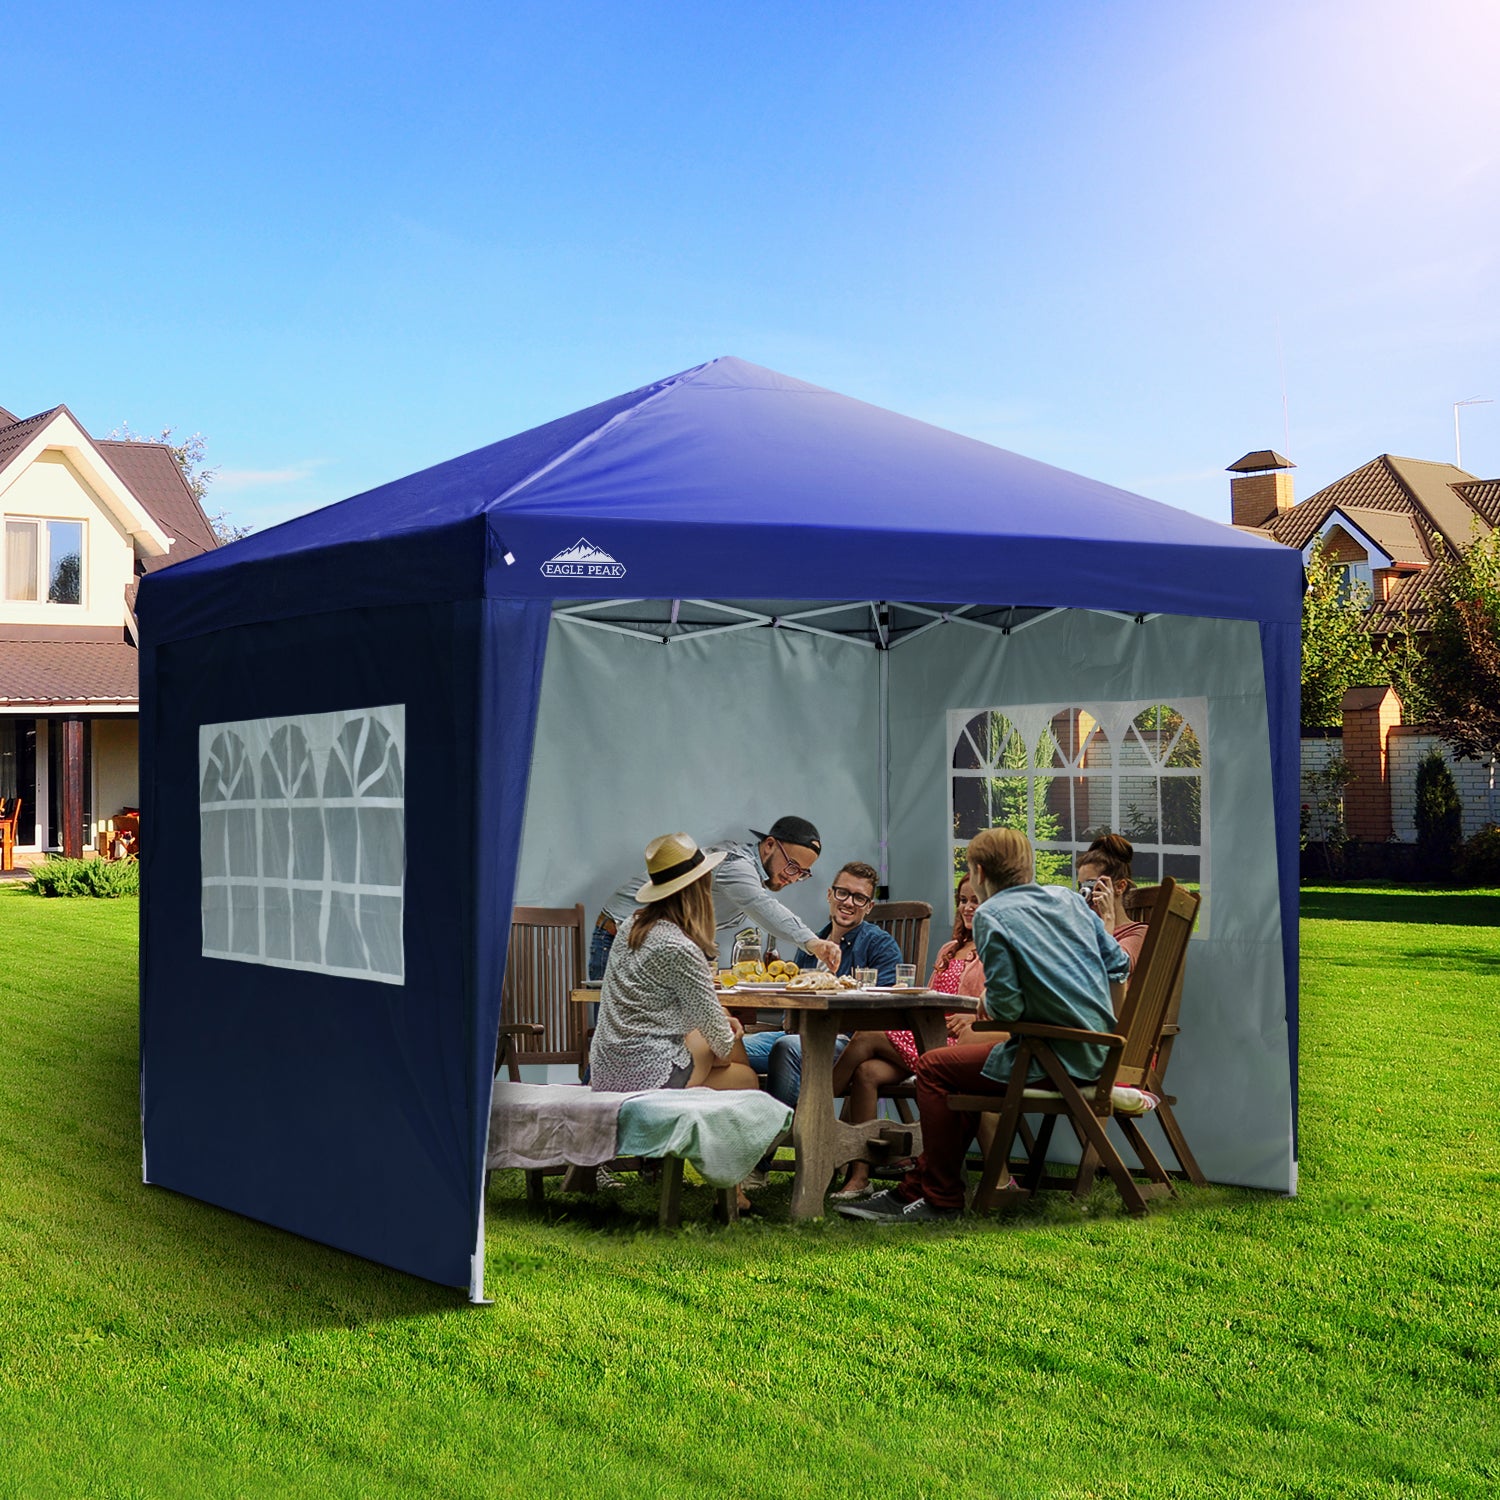 EAGLE PEAK 10x10 Pop Up Canopy Tent with 4 Side Walls, Easy Set up She